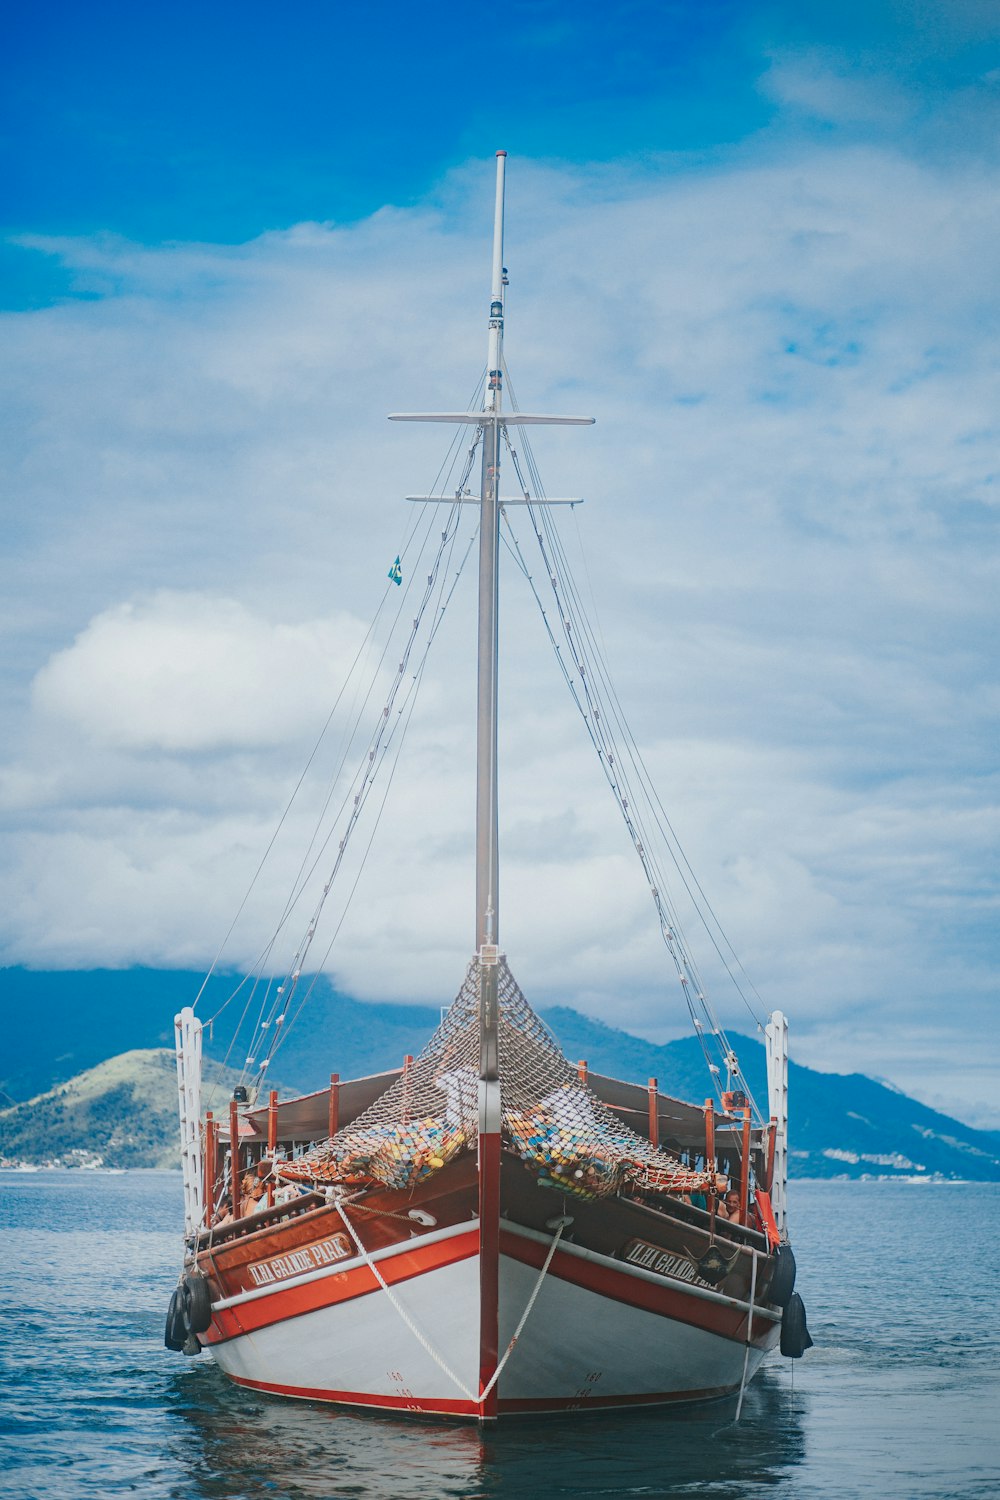 brown wooden boat on sea under white clouds and blue sky during daytime